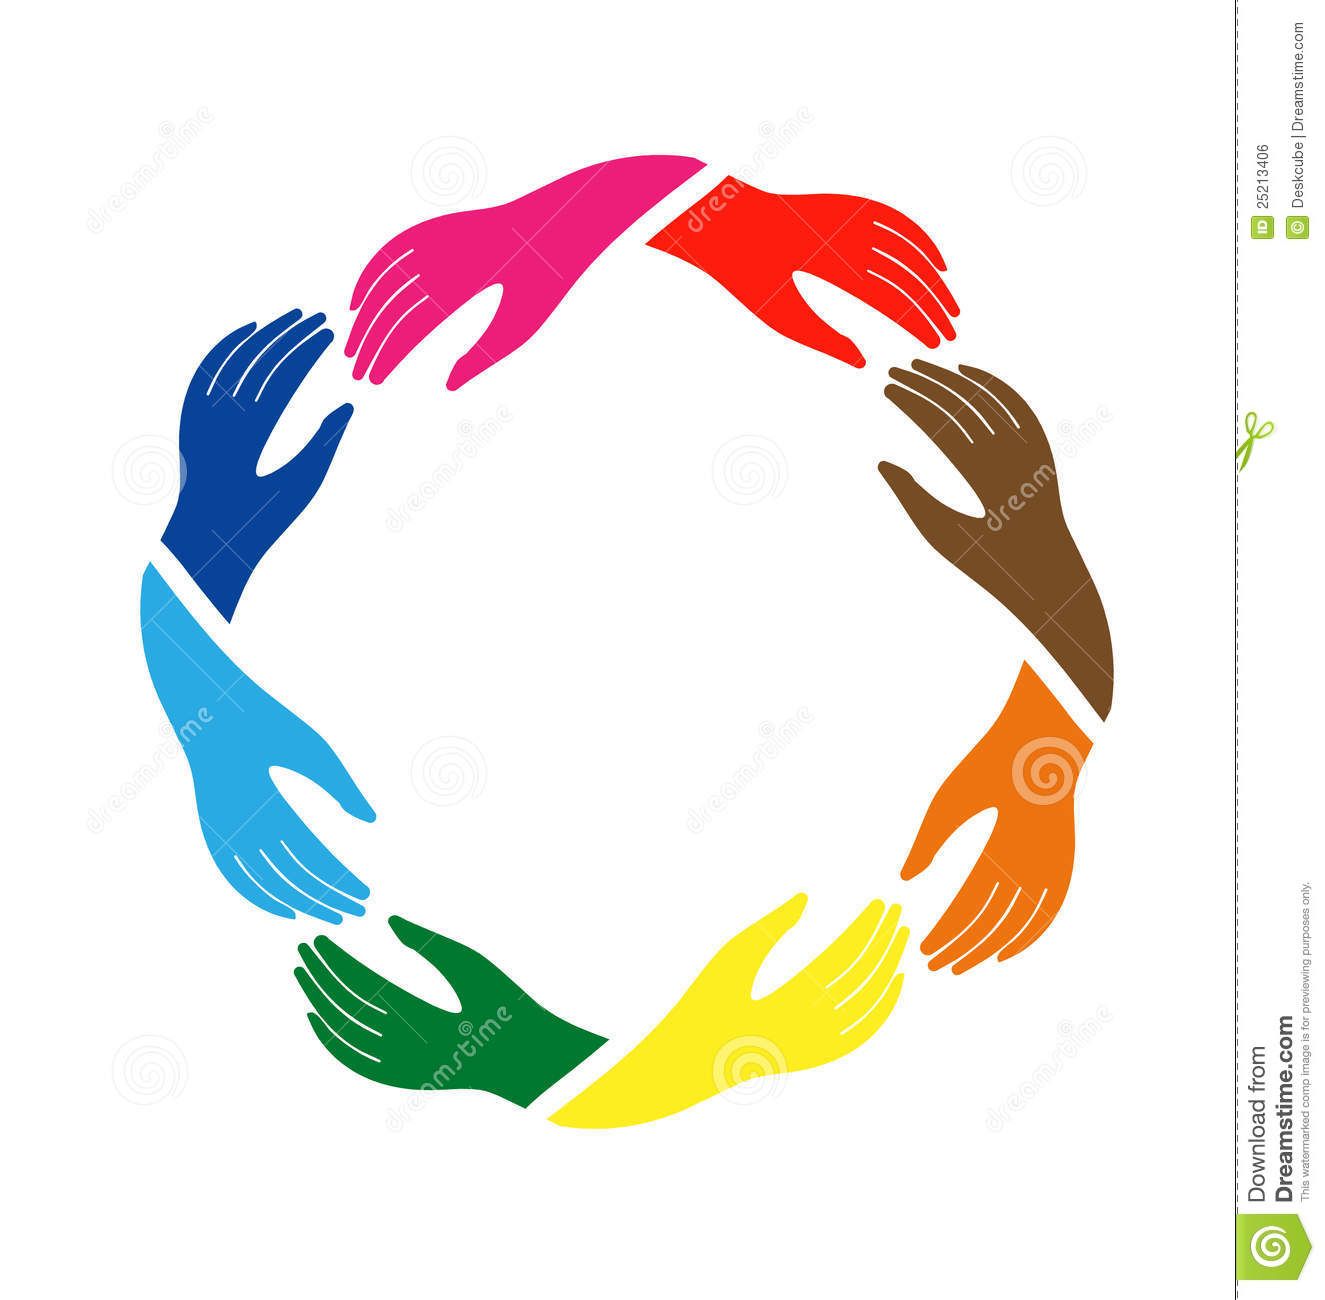 On friendship logo dreamstime. Hands clipart equality